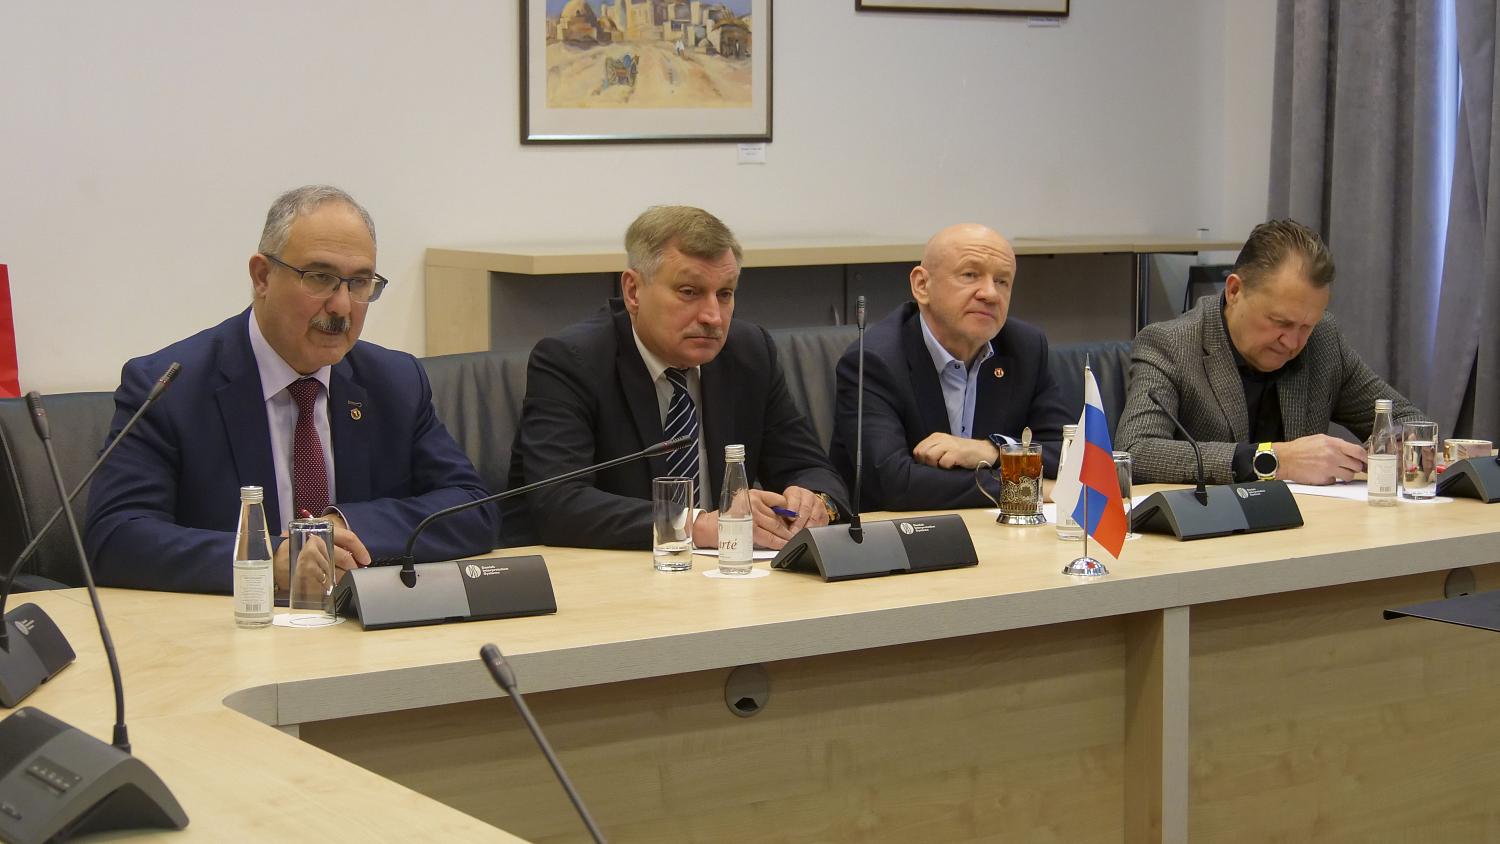 Distinguished guests from Indonesia visited the Moscow Chamber of Commerce and Industry